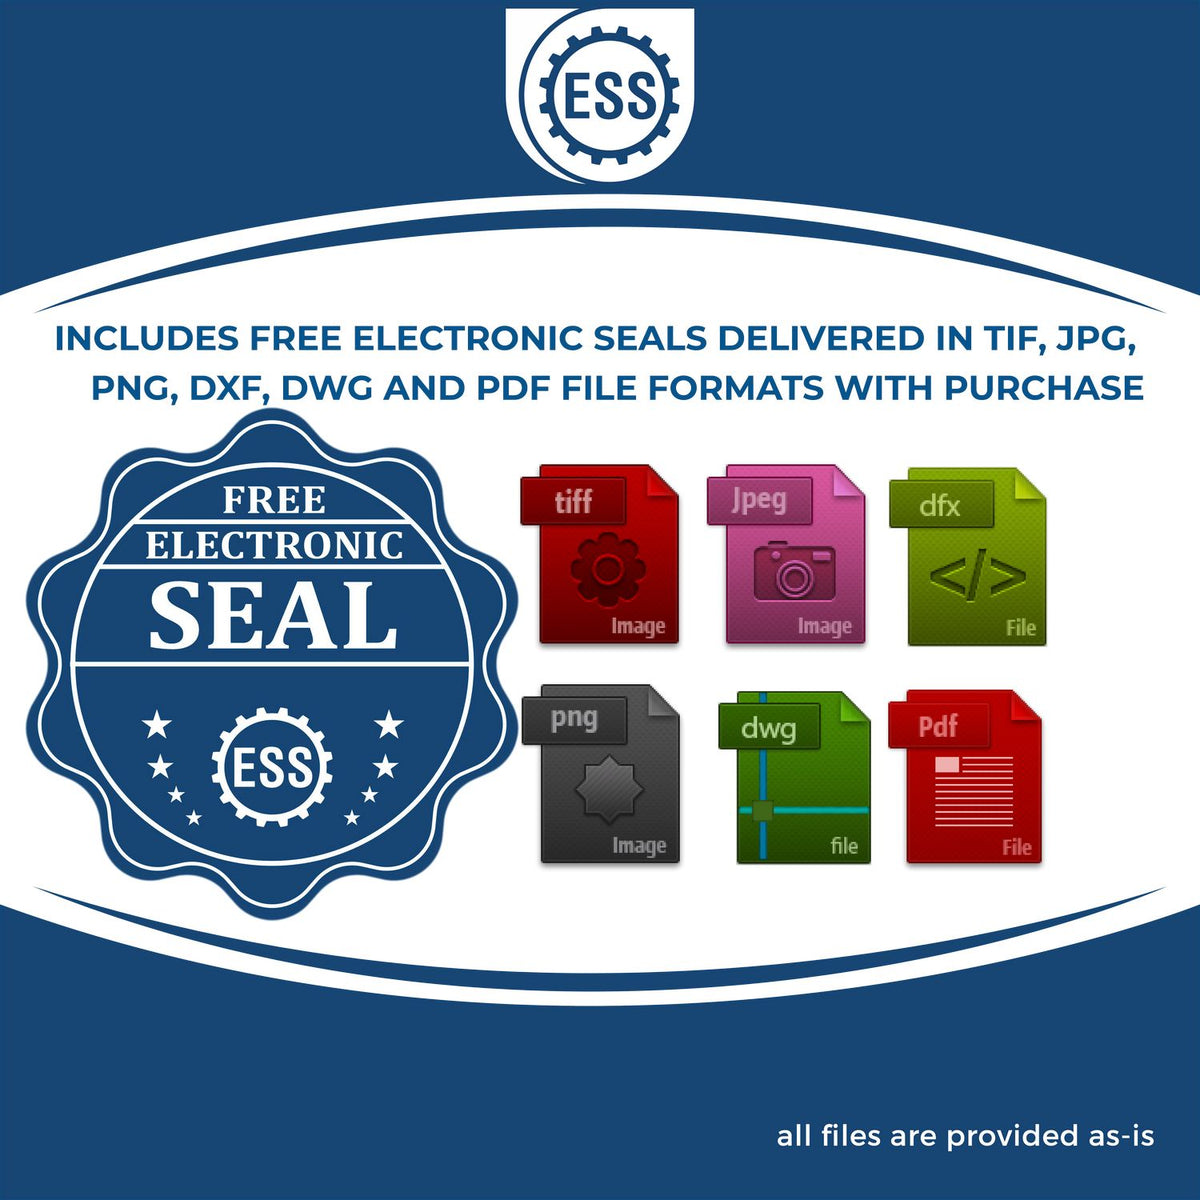 An infographic for the free electronic seal for the Hybrid Pennsylvania Architect Seal illustrating the different file type icons such as DXF, DWG, TIF, JPG and PNG.